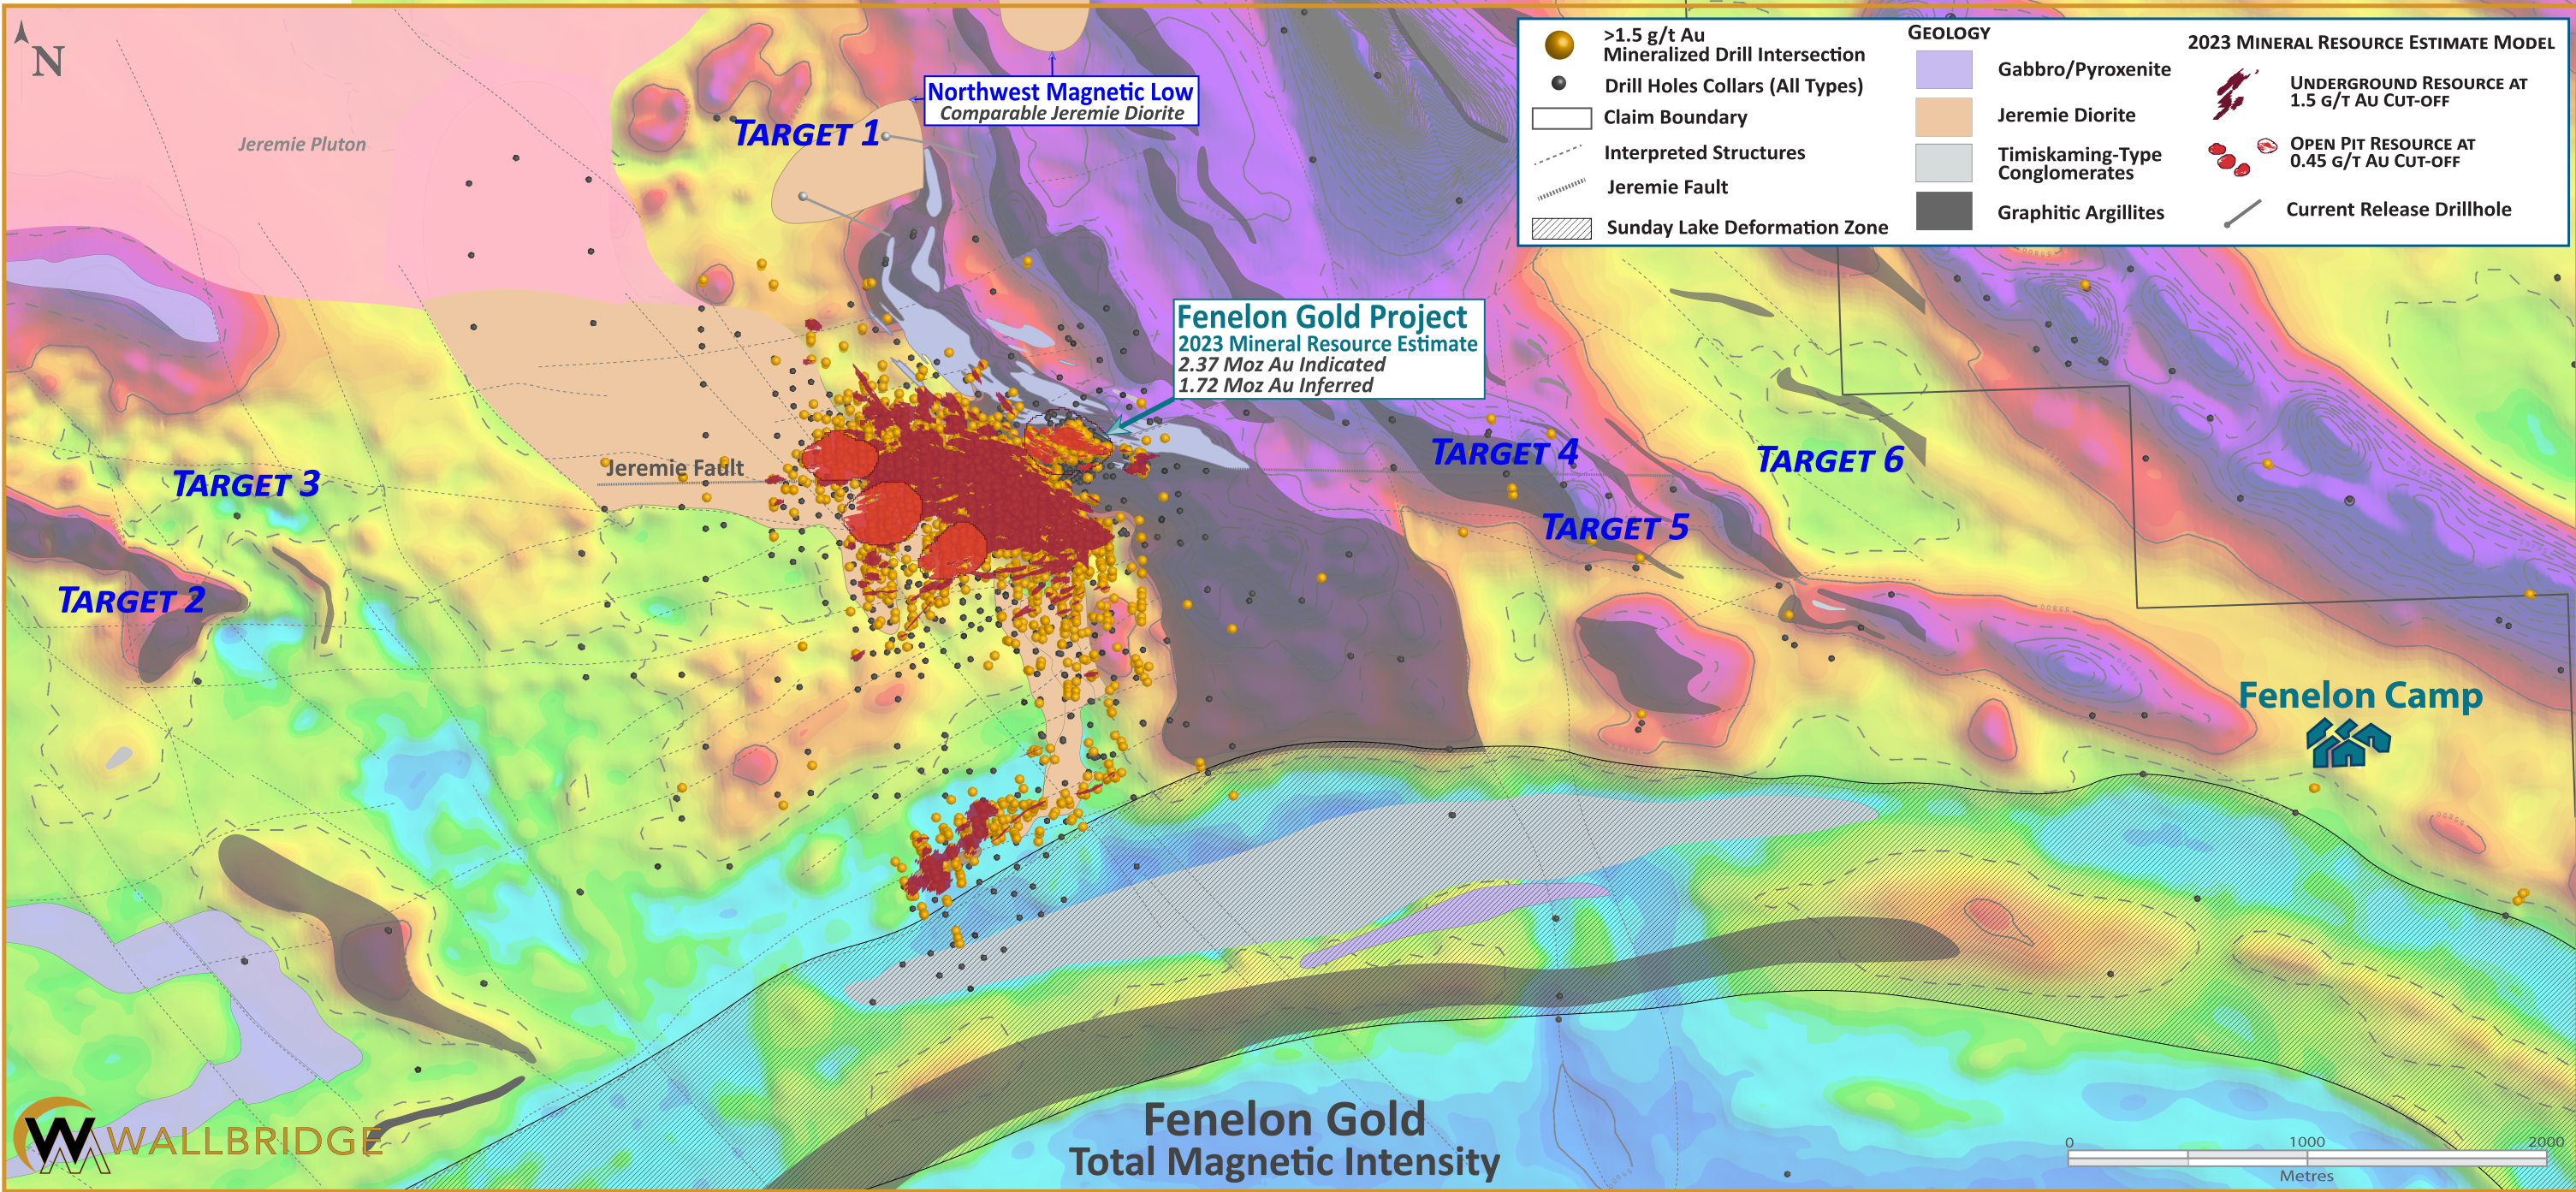 A colored map with a key showing the total magnetic intensity and geology of Fenelon Gold